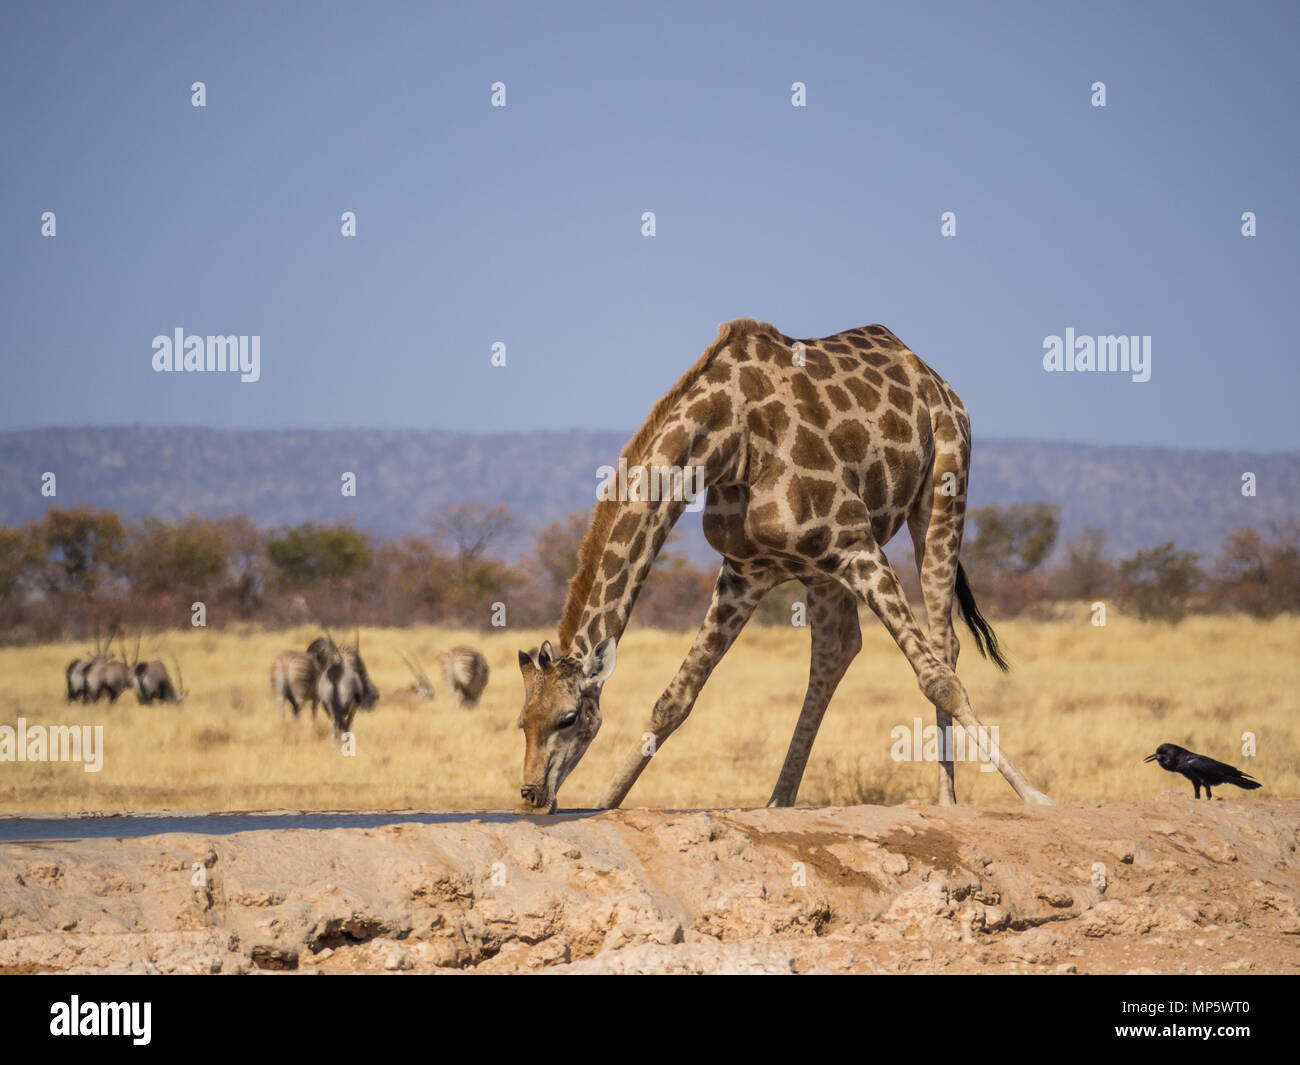 Giraffe bending down to drink at water hole in Etosha National Park, Namibia, Southern Africa Stock Photo